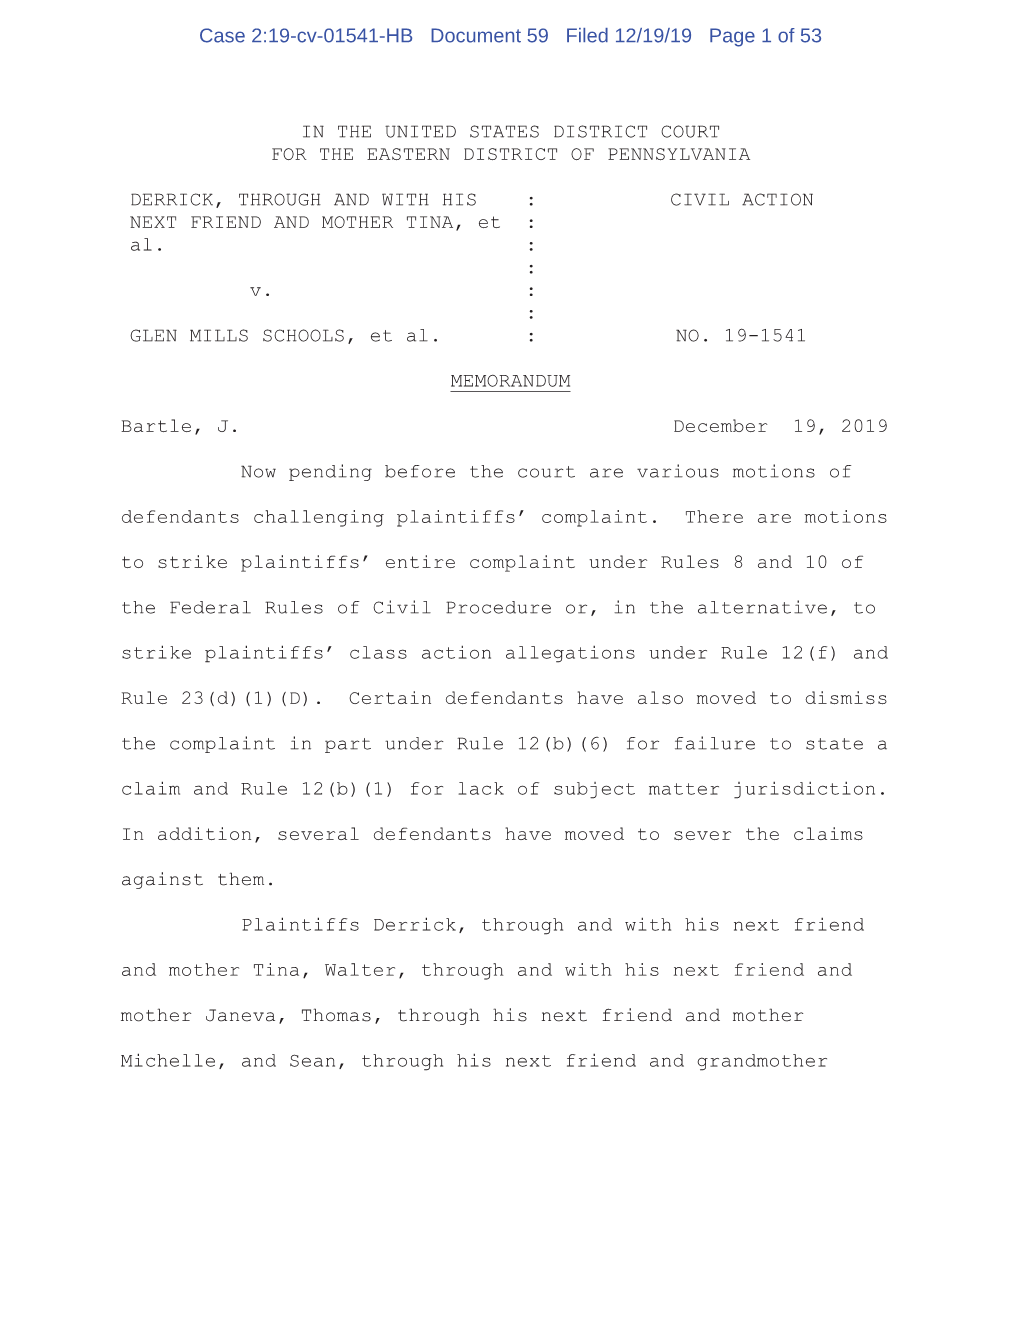 Case 2:19-Cv-01541-HB Document 59 Filed 12/19/19 Page 1 of 53